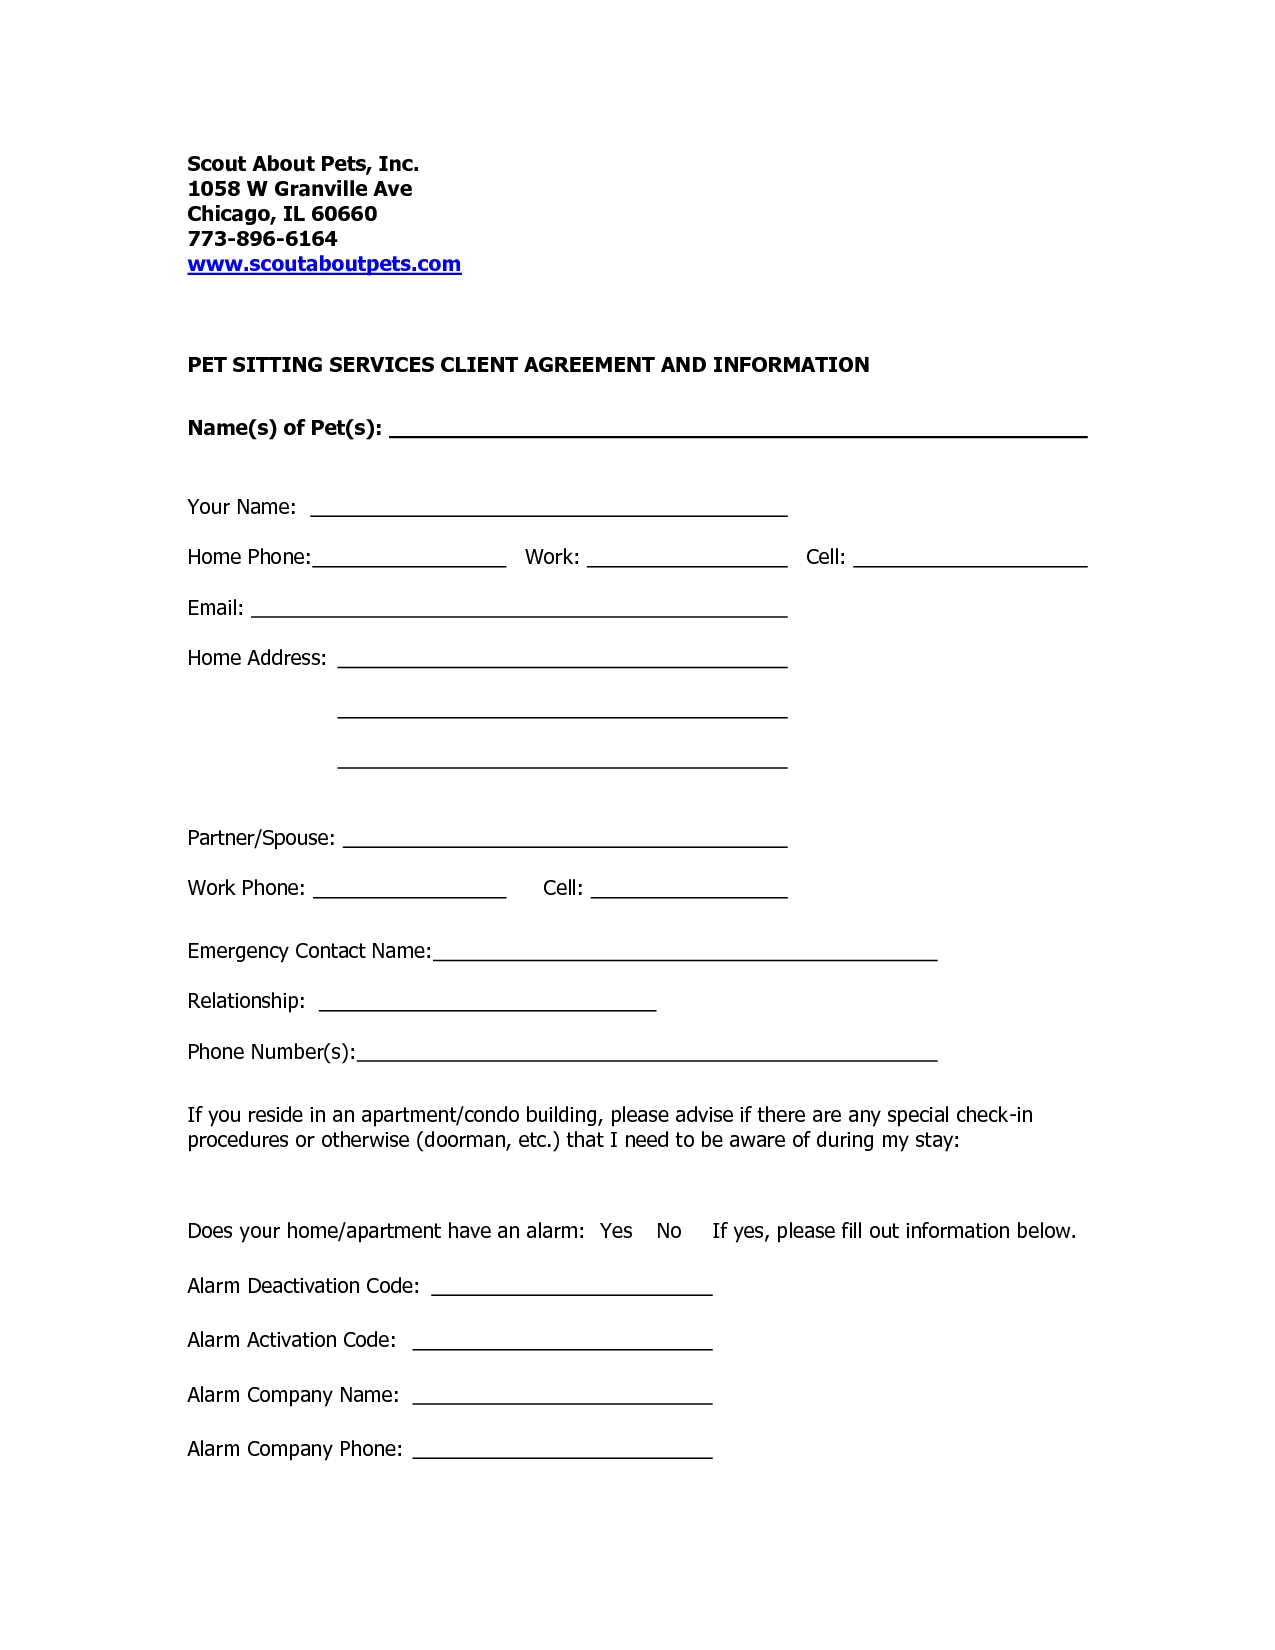 Pet Sitter Waiver Form Template